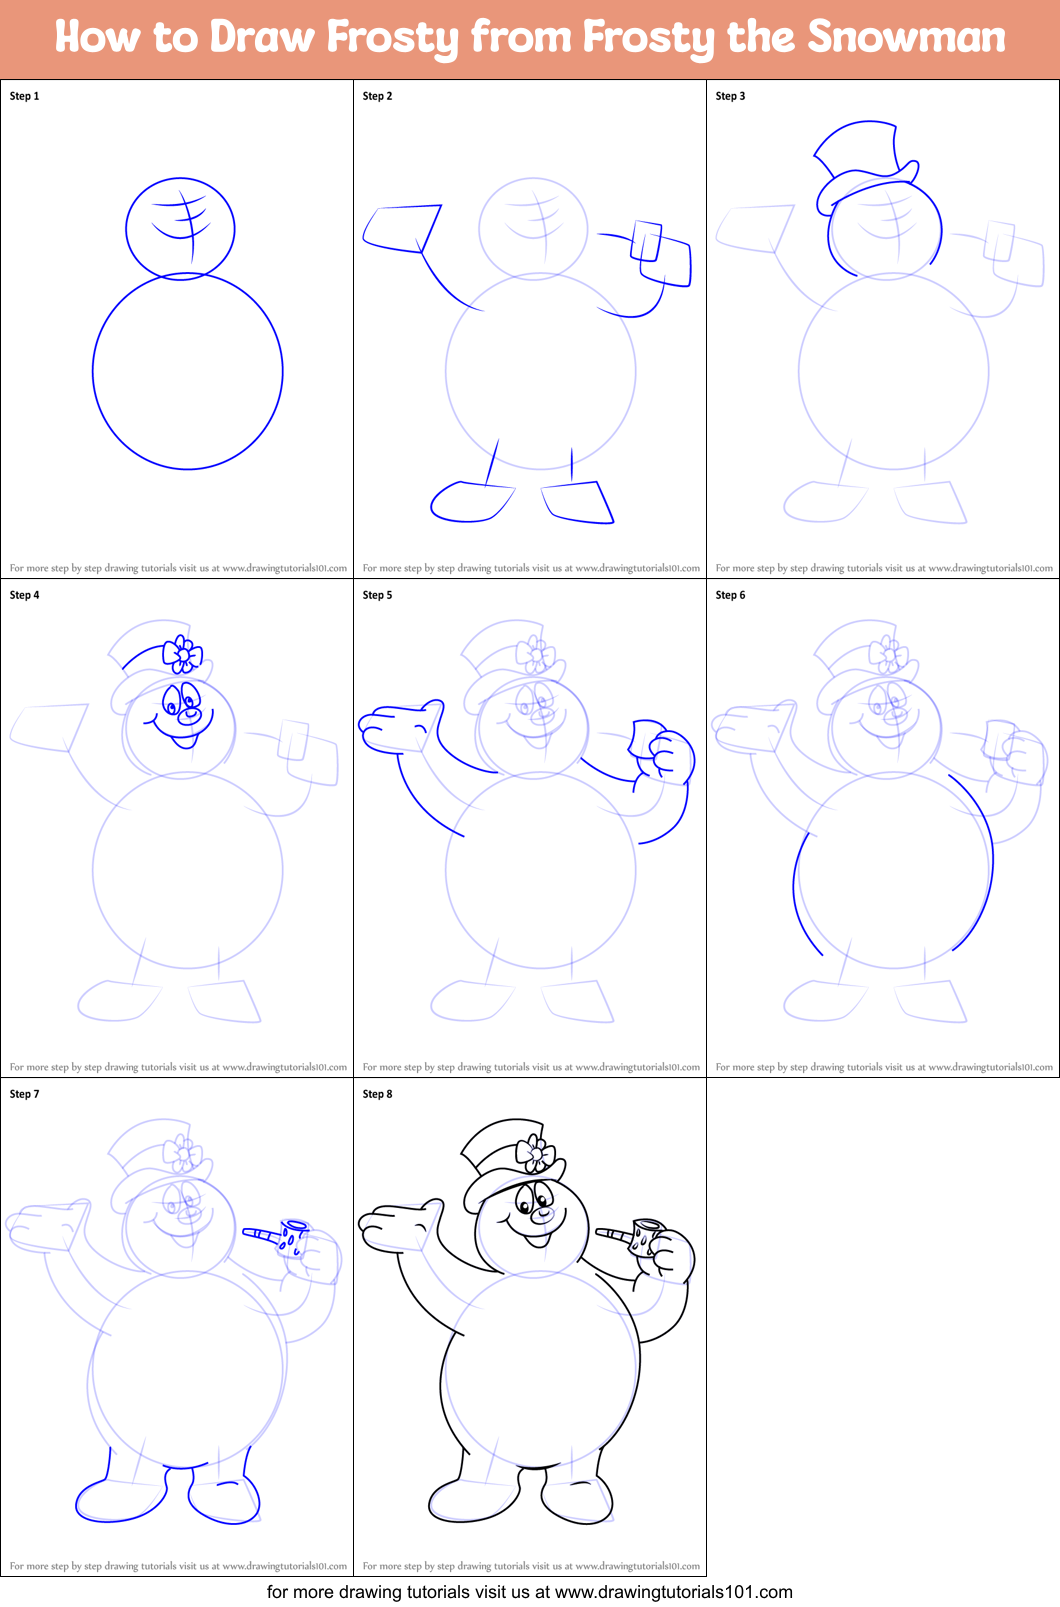 How To Draw Frosty From Frosty The Snowman Frosty The Snowman Step By Step